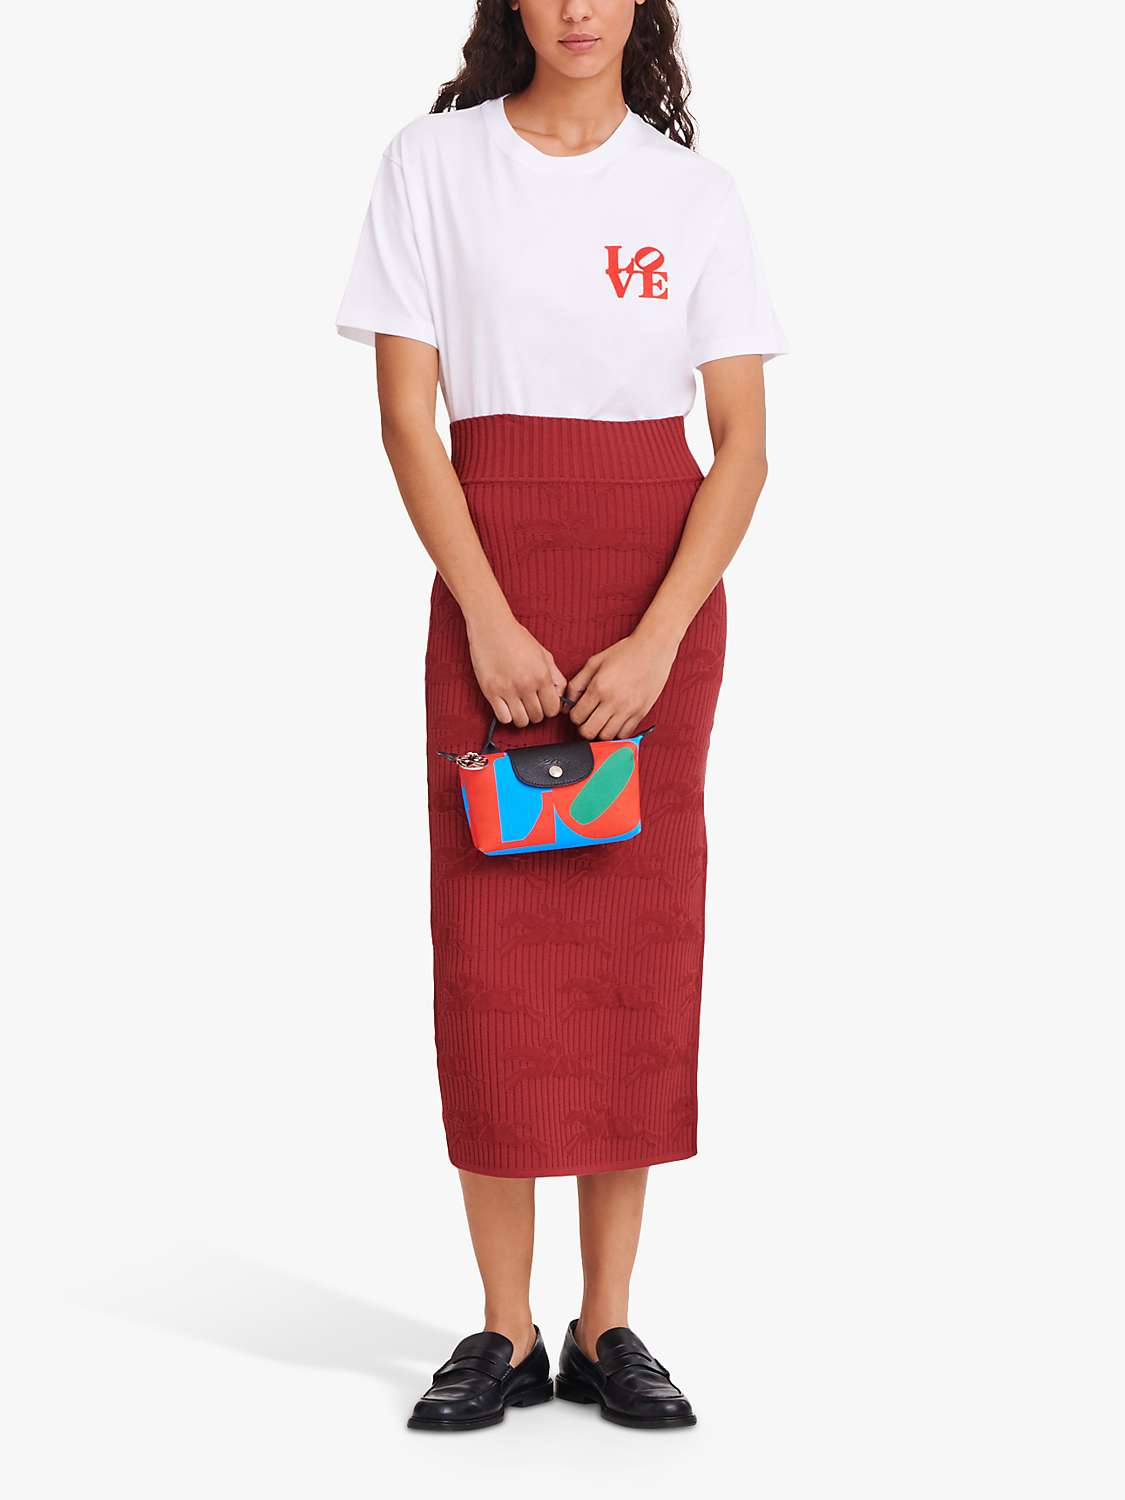 Buy Longchamp Robert Indiana Pouch, Red Online at johnlewis.com